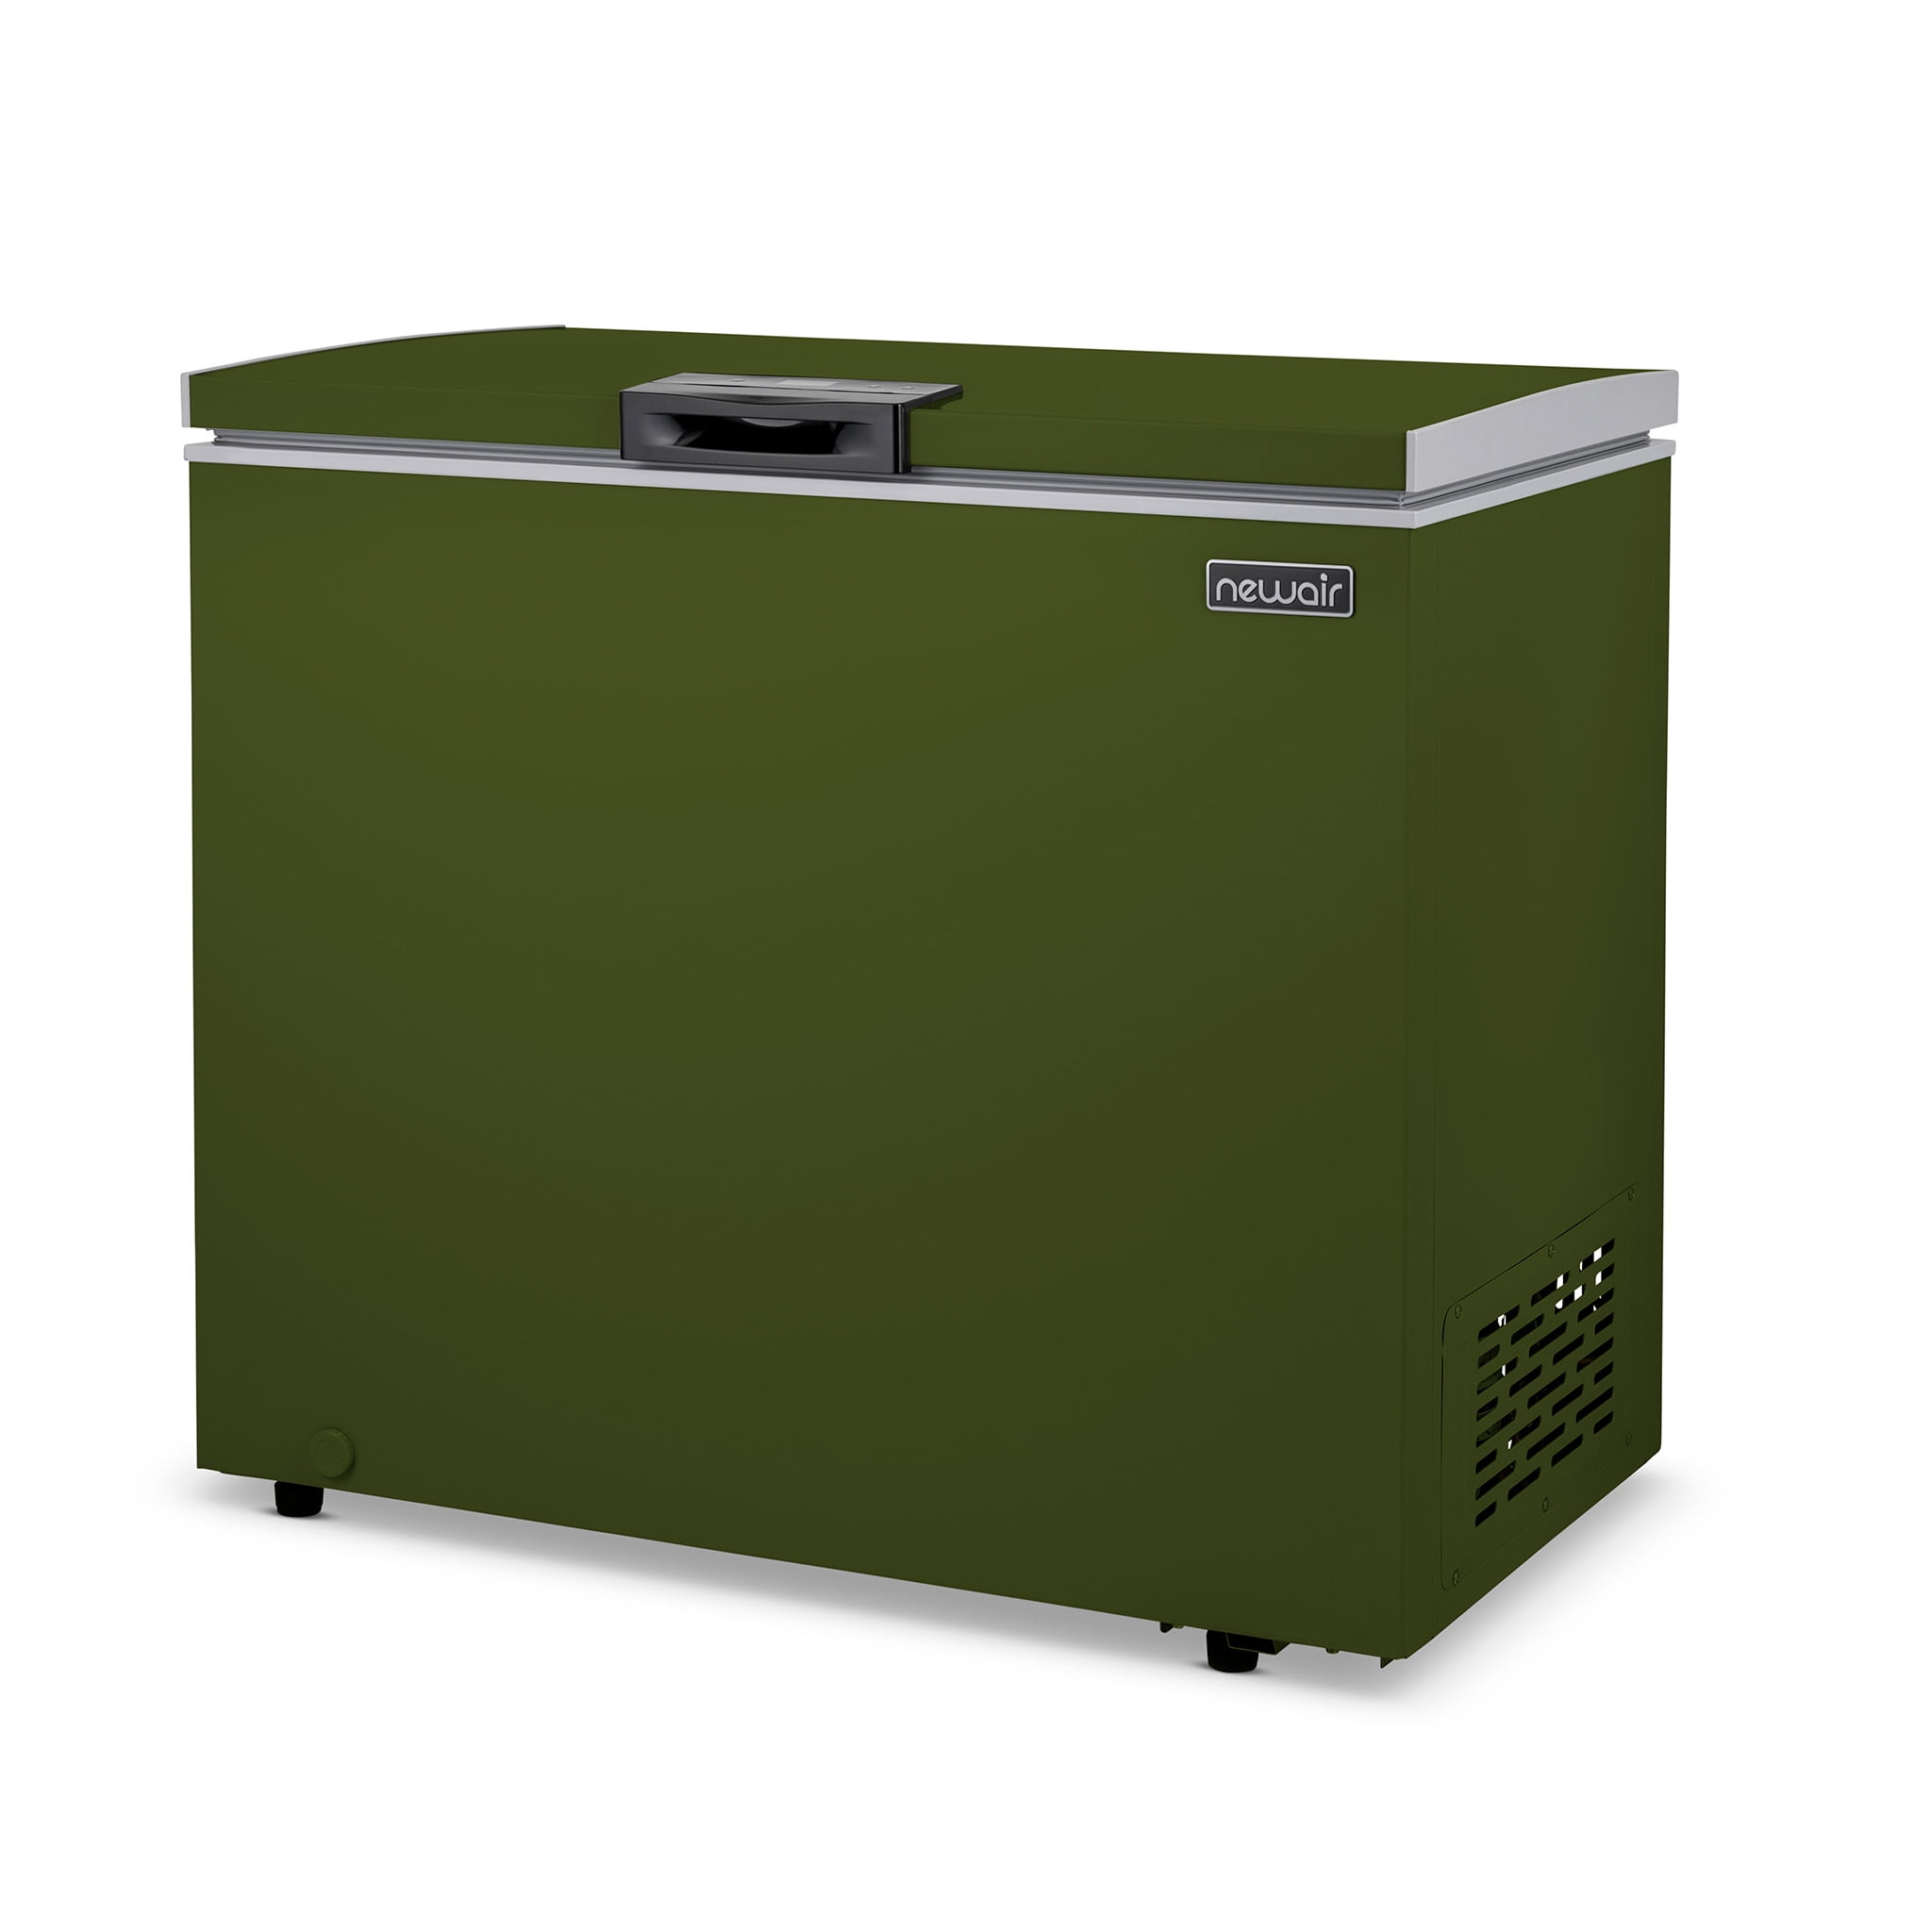 NewAir 5 Cu. ft. Mini Deep Chest Freezer and Refrigerator in Military Green with Digital Temperature Control